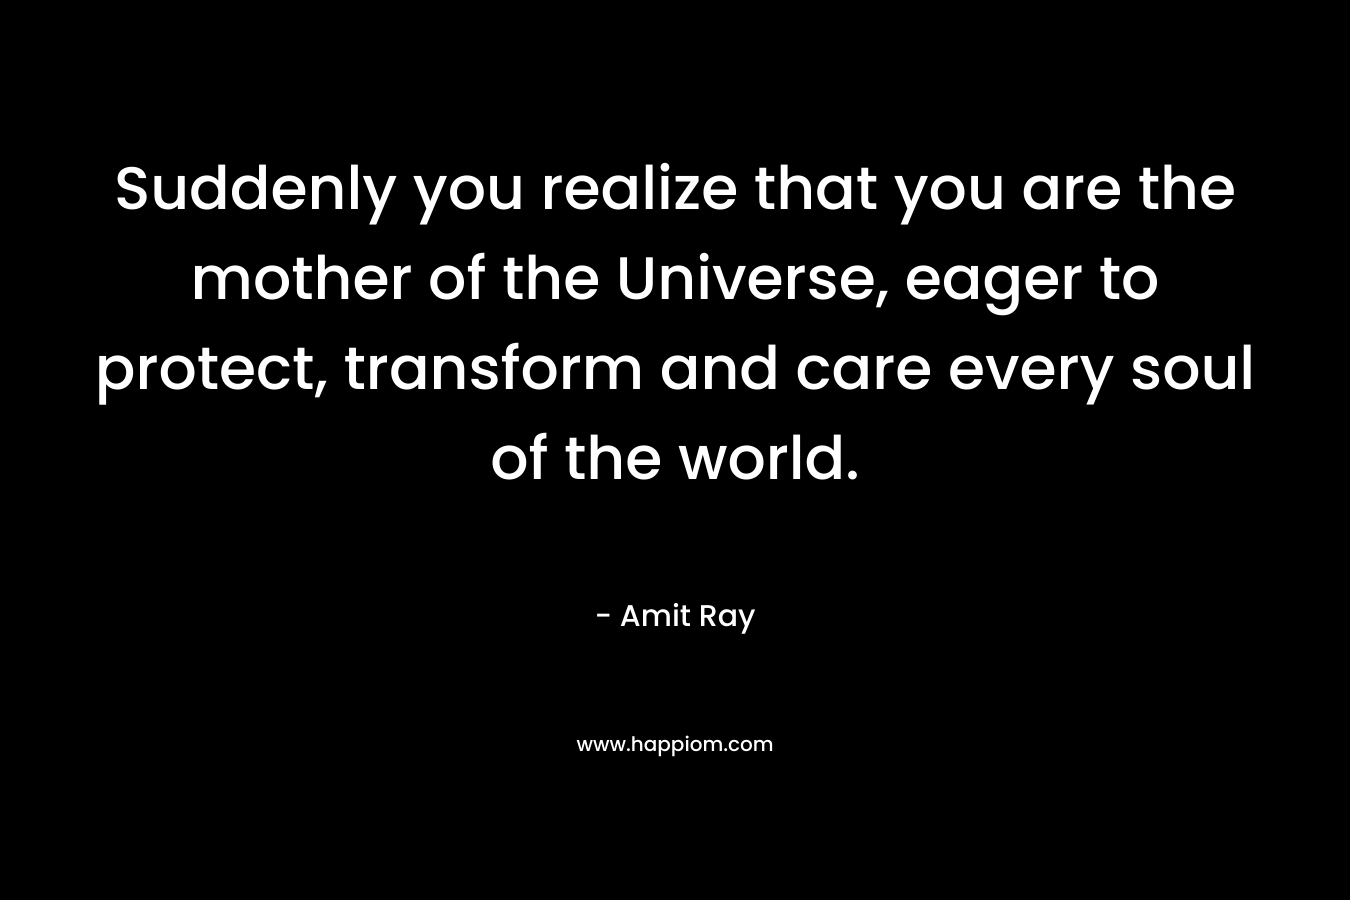 Suddenly you realize that you are the mother of the Universe, eager to protect, transform and care every soul of the world. – Amit Ray